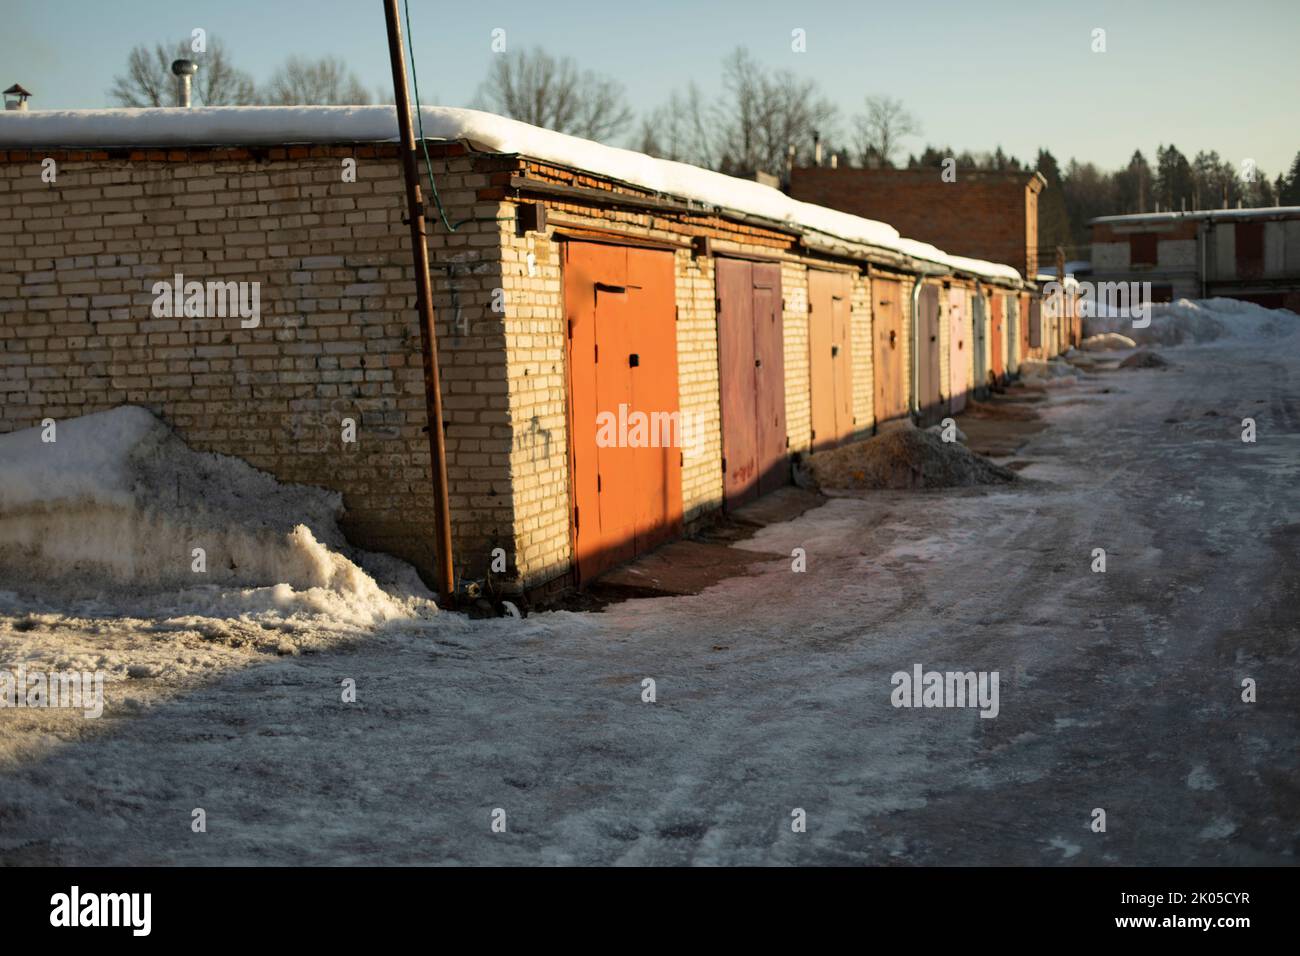 Garages in Russia. One-storey brick building. Travel in winter. Stock Photo